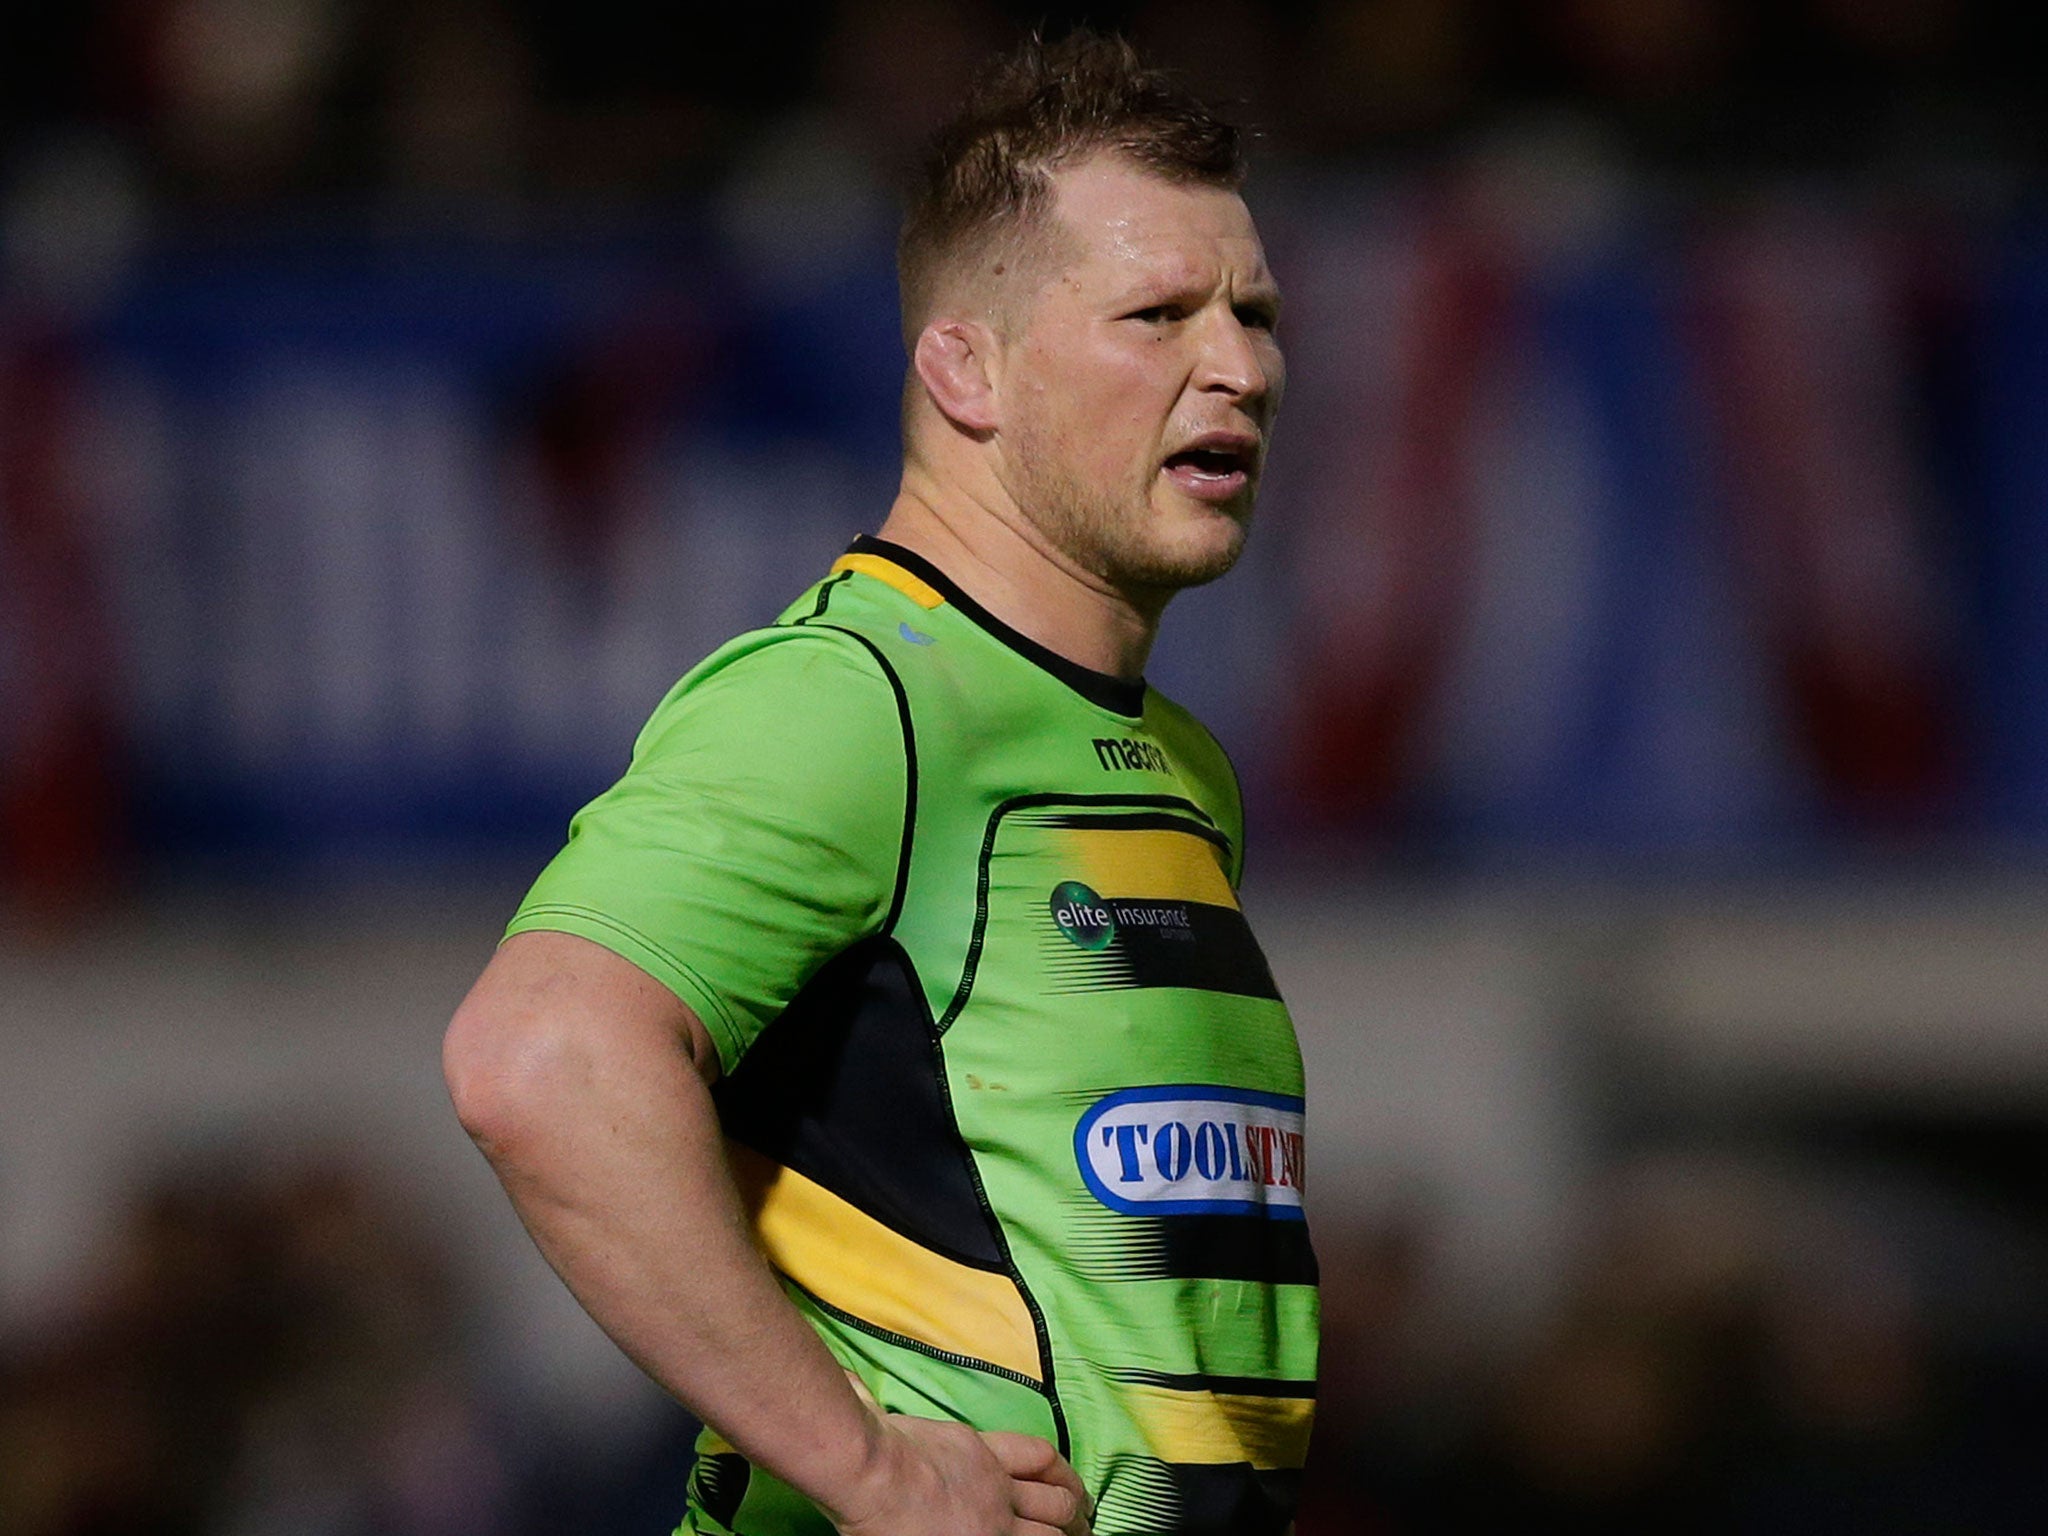 Dylan Hartley has not played for Northampton since January after suffering concussion in March